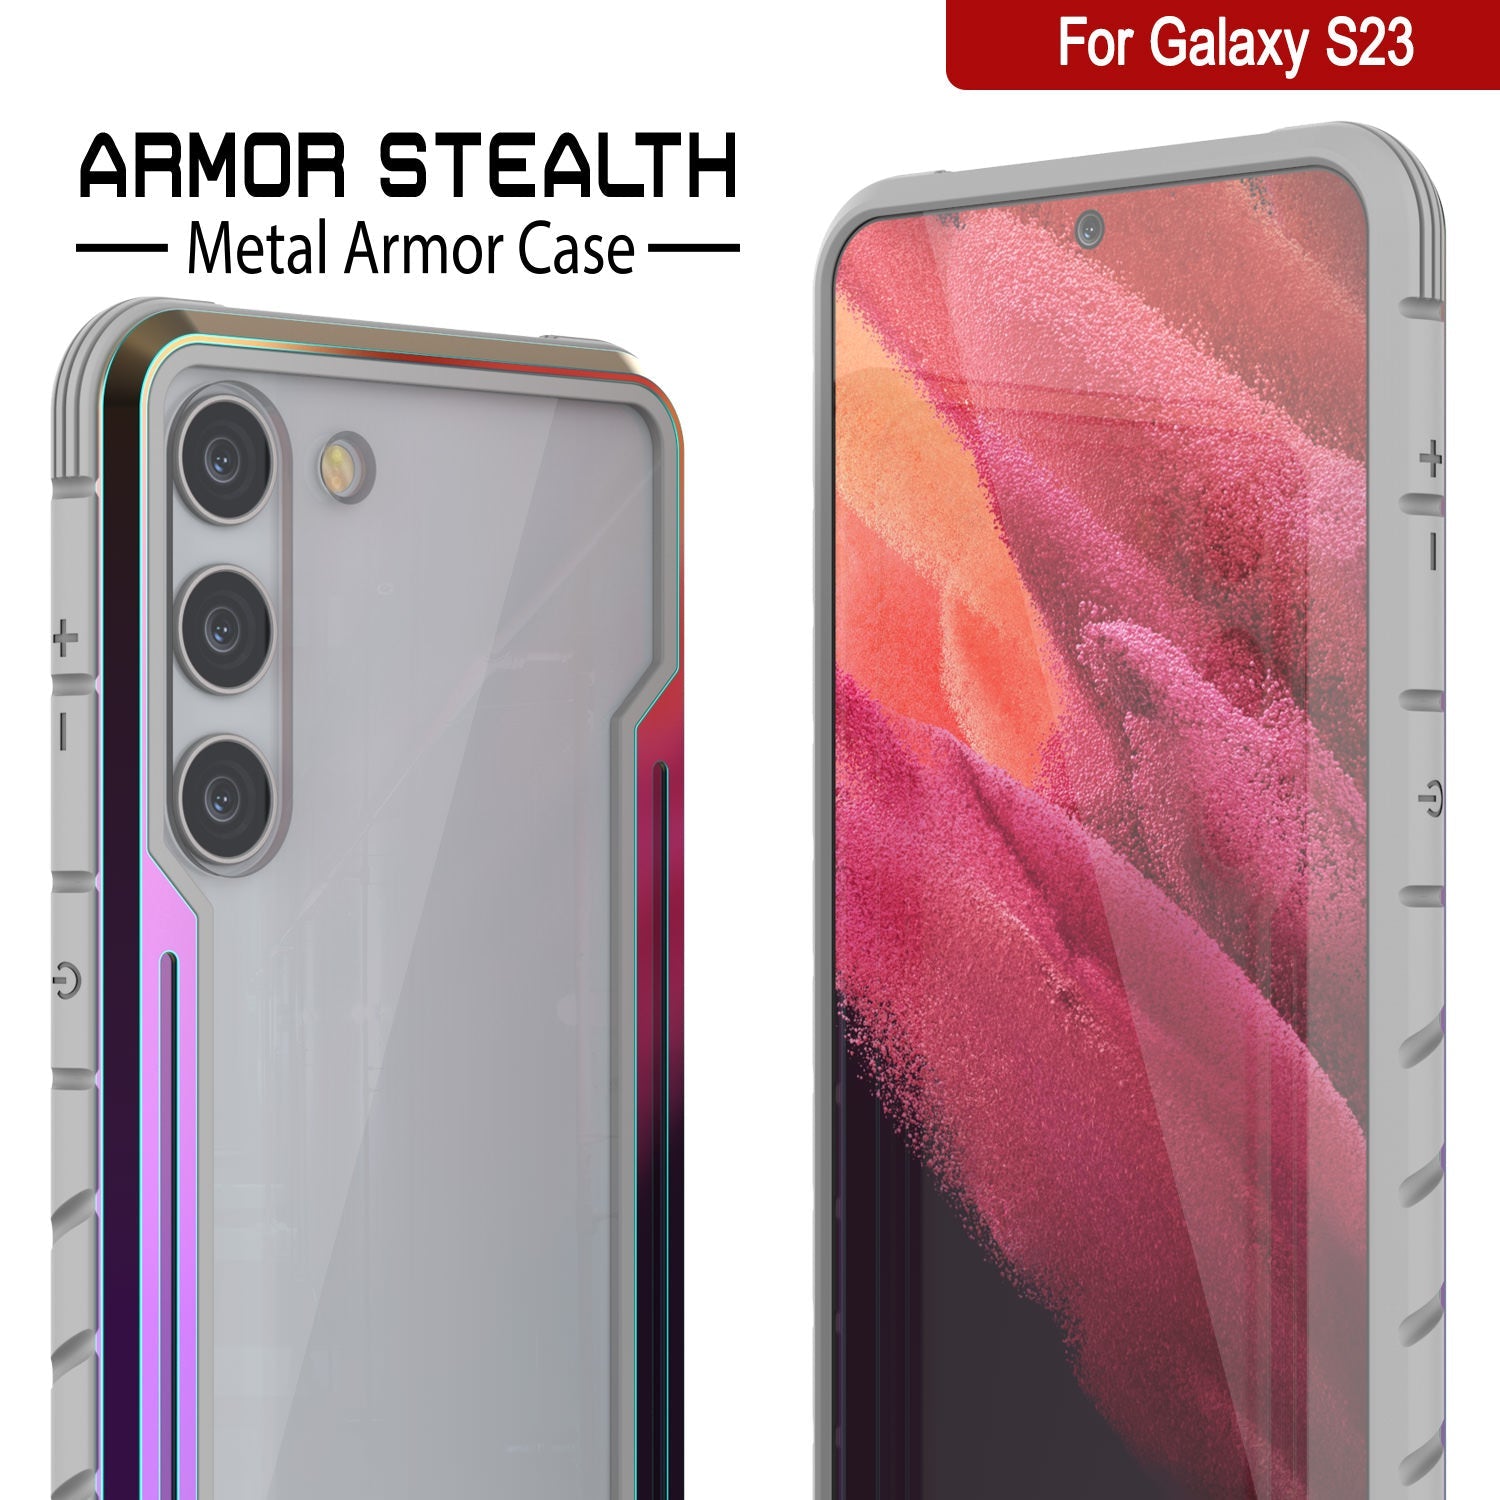 Punkcase S23 Armor Stealth Case Protective Military Grade Multilayer Cover [Rainbow]